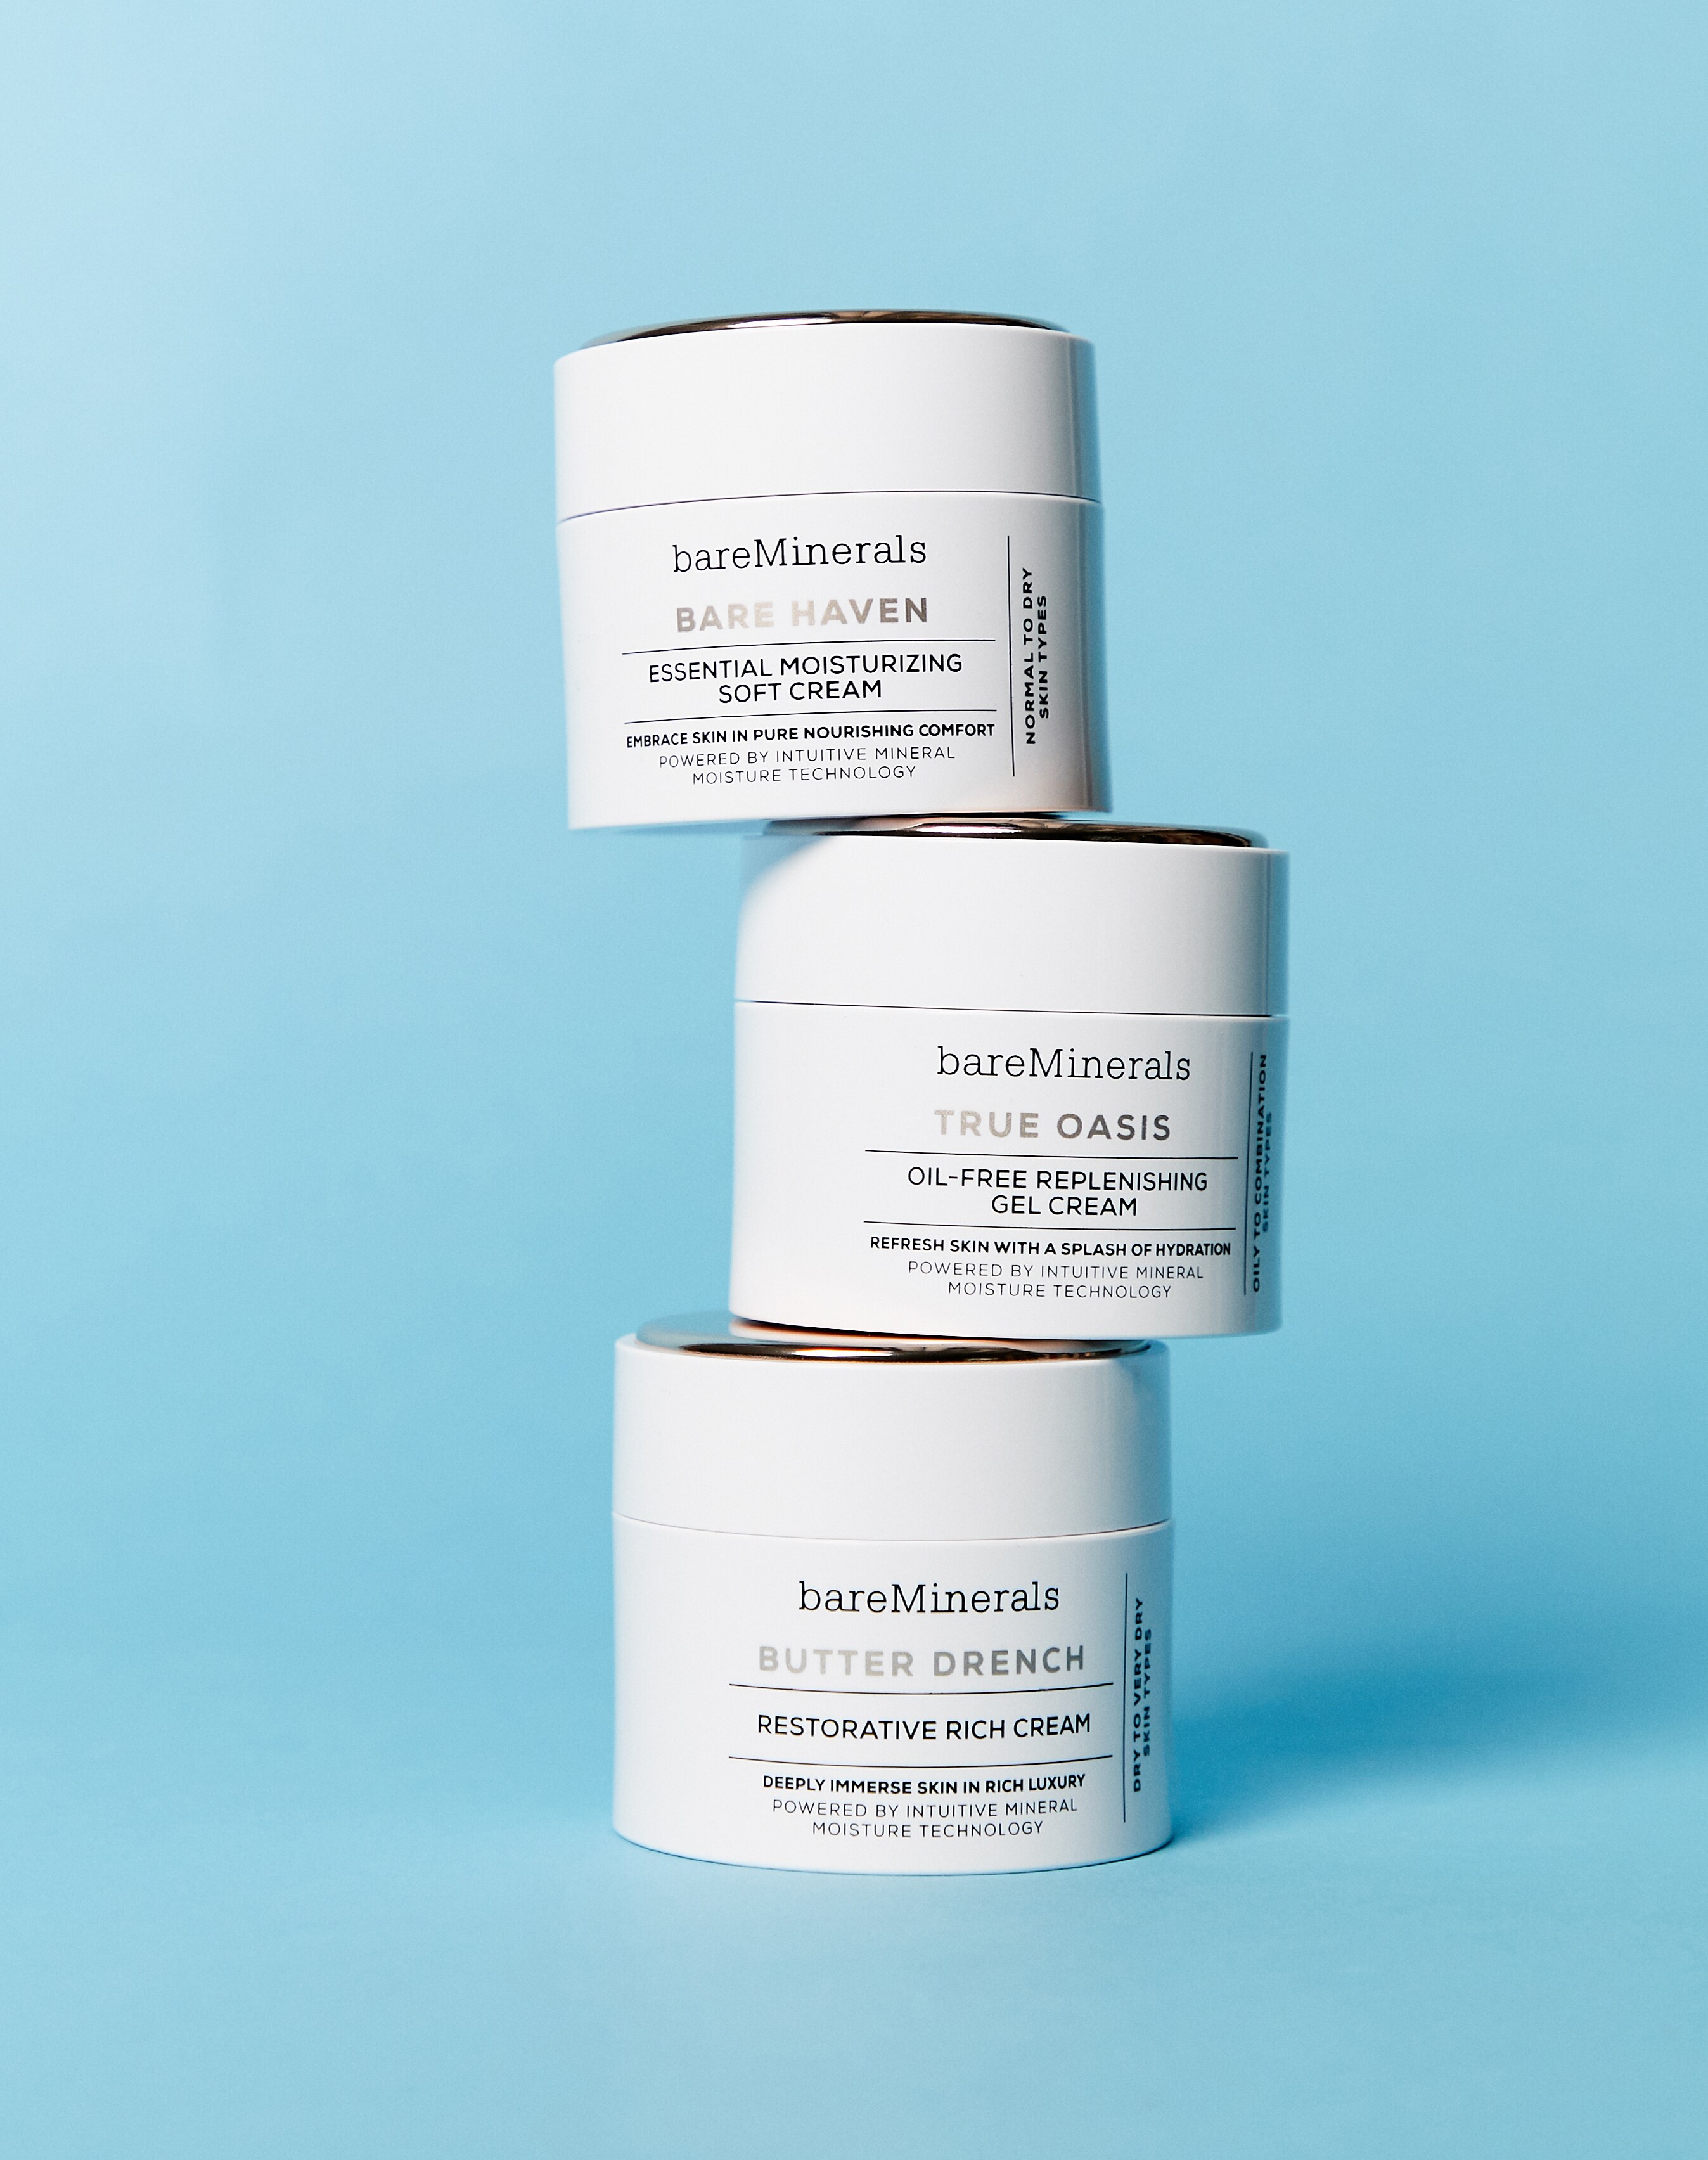 BareMinerals skincare on ASOS | ASOS Style Feed